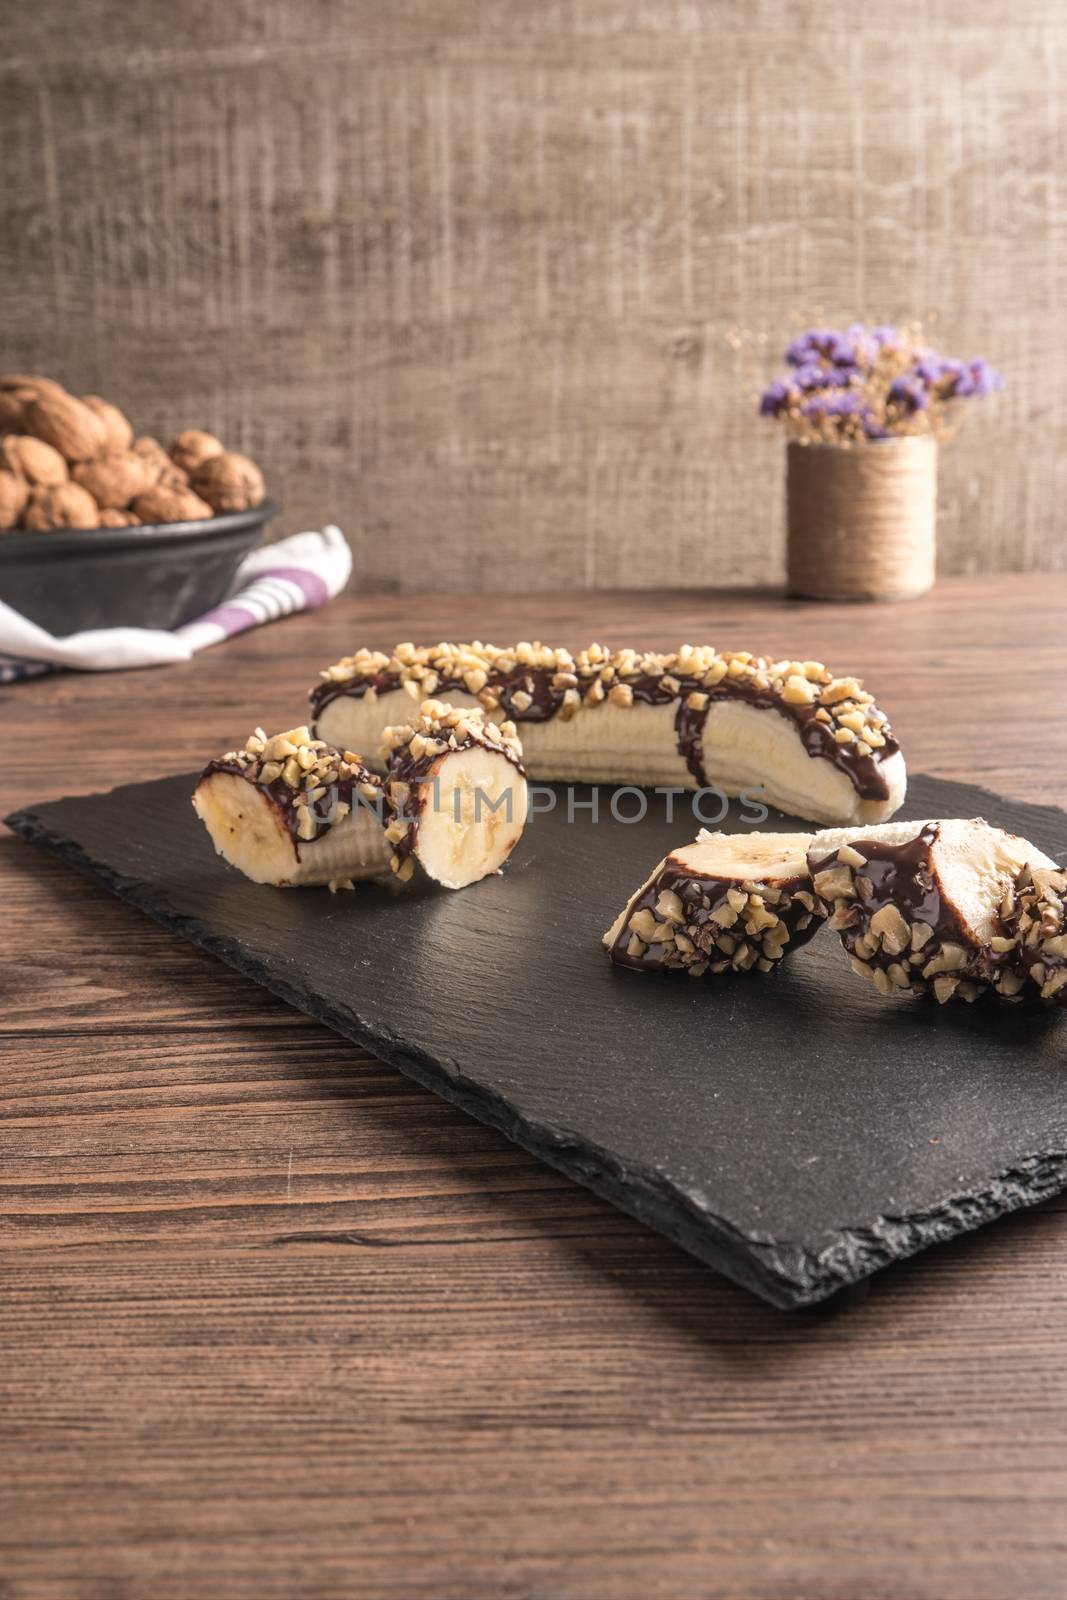 Fresh banana with melted chocolate and nuts coverage on slate